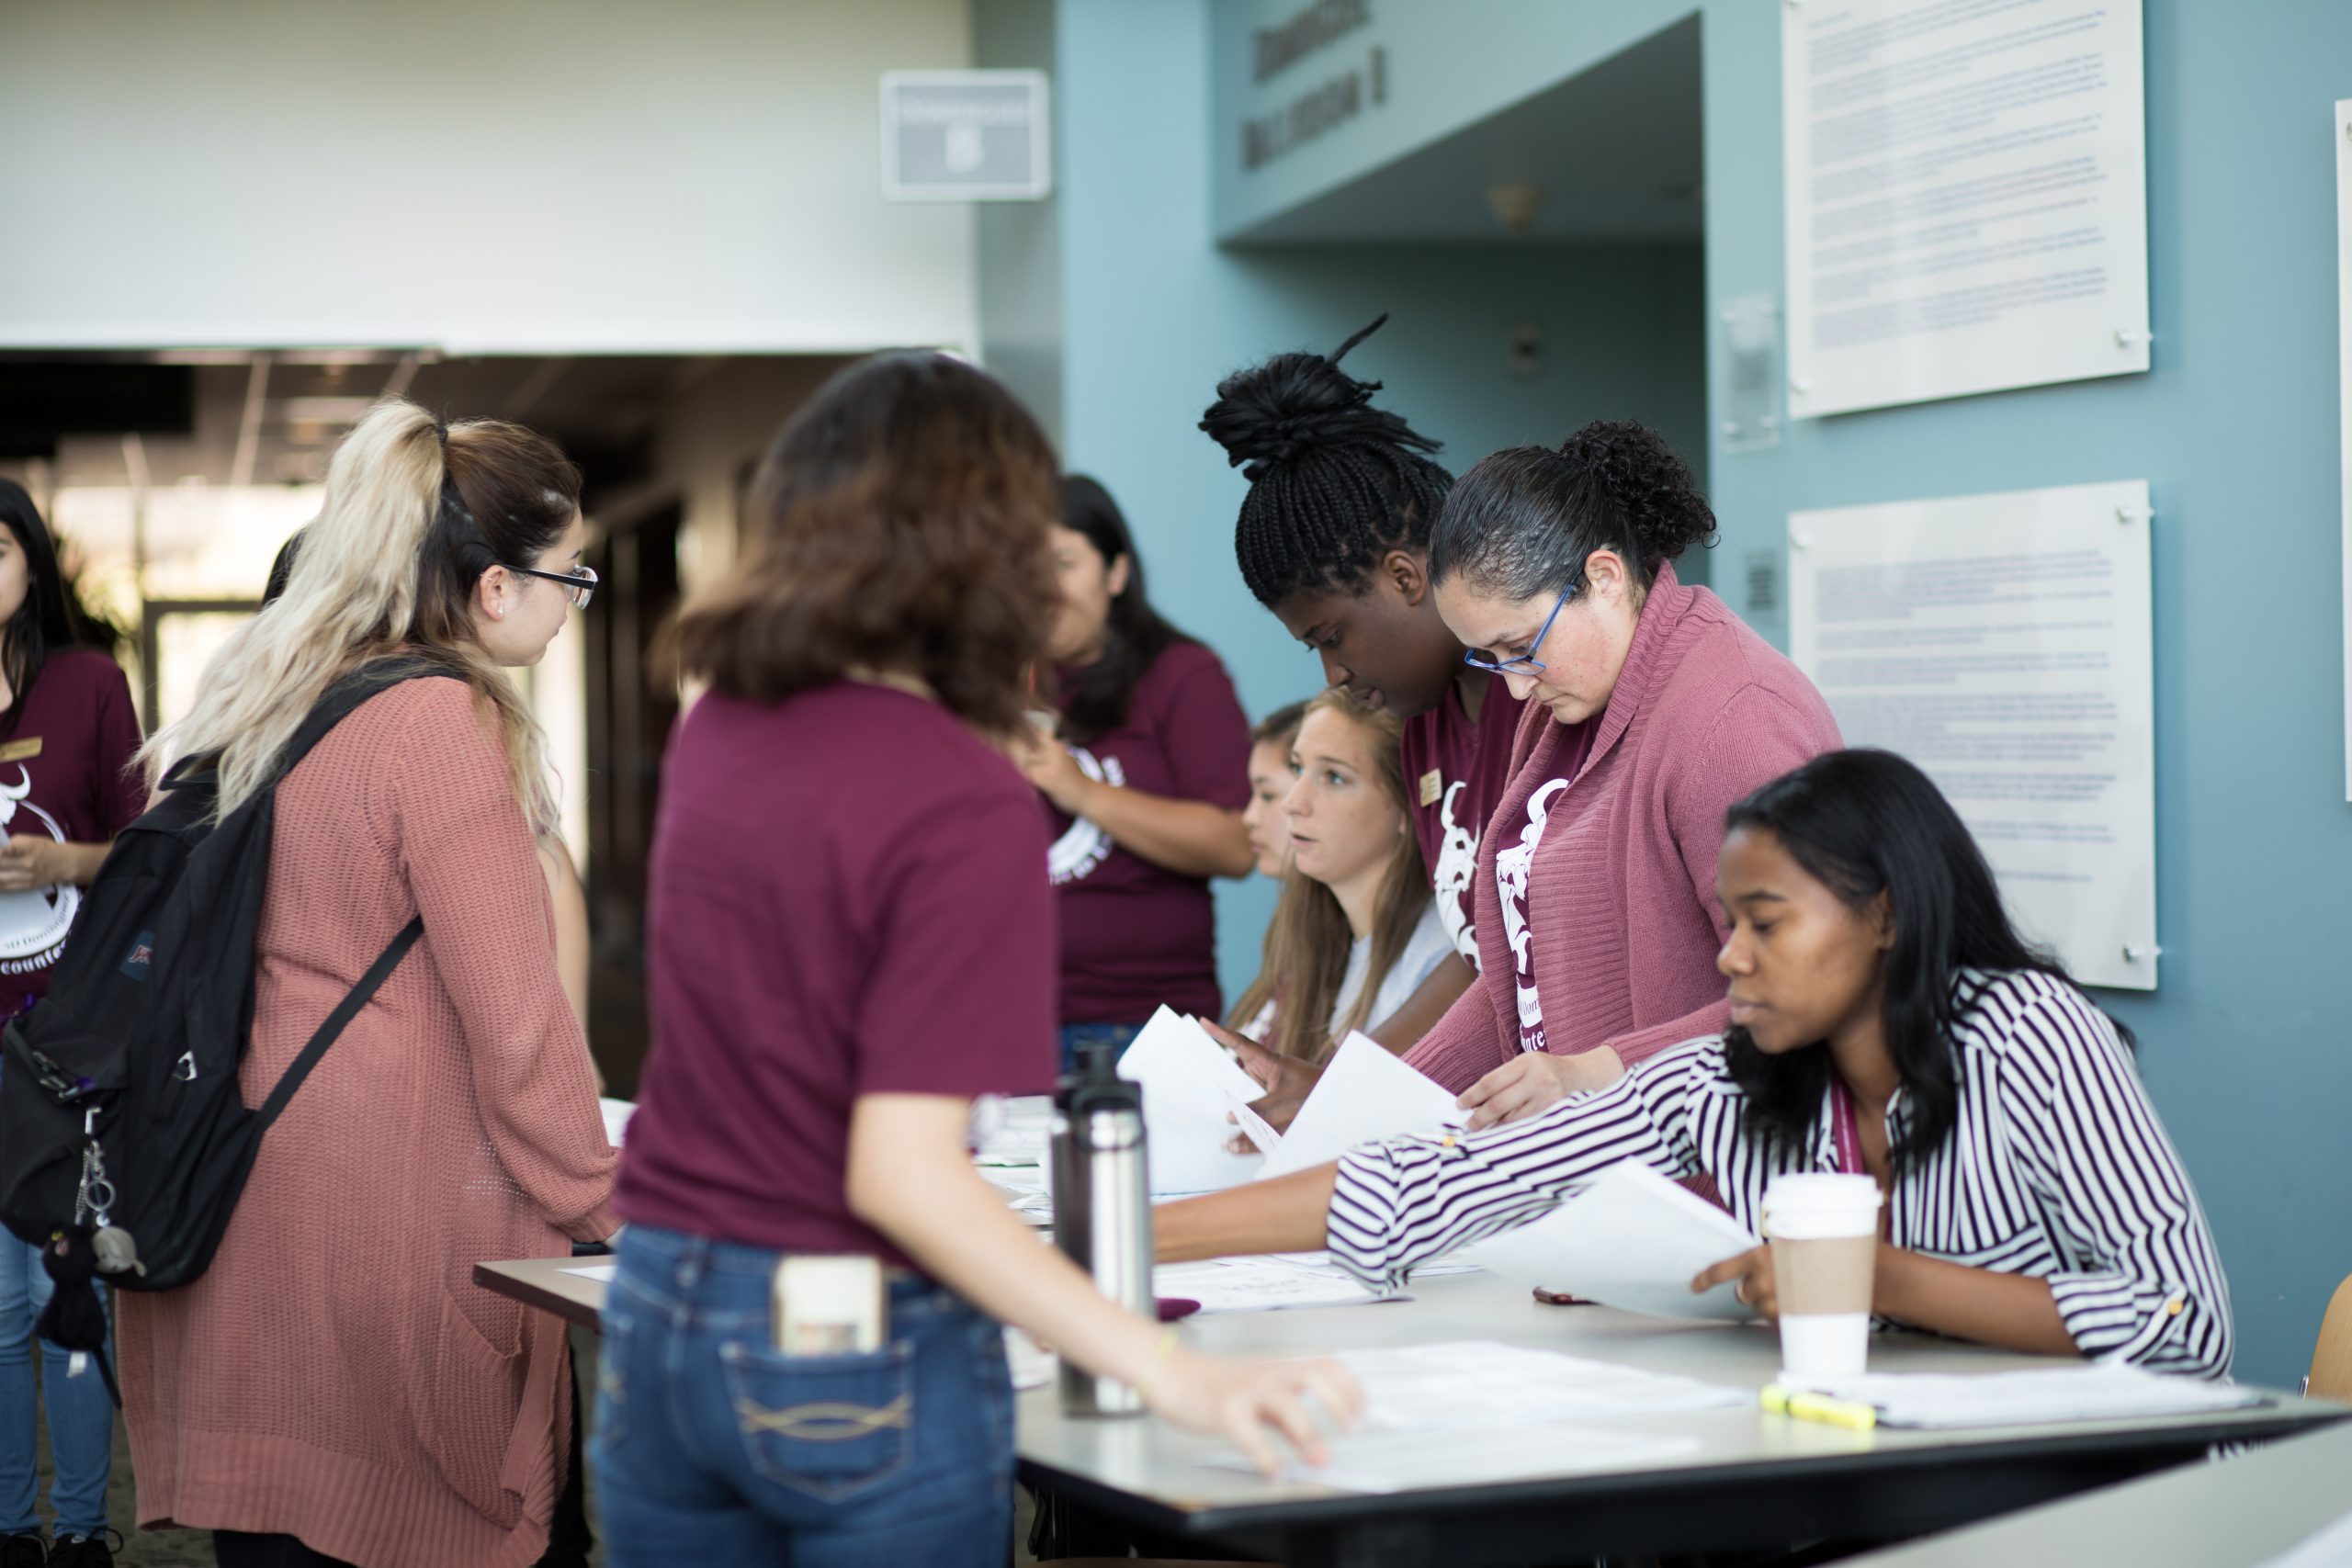 Students Organizing Events in California State University, Dominguez Hills